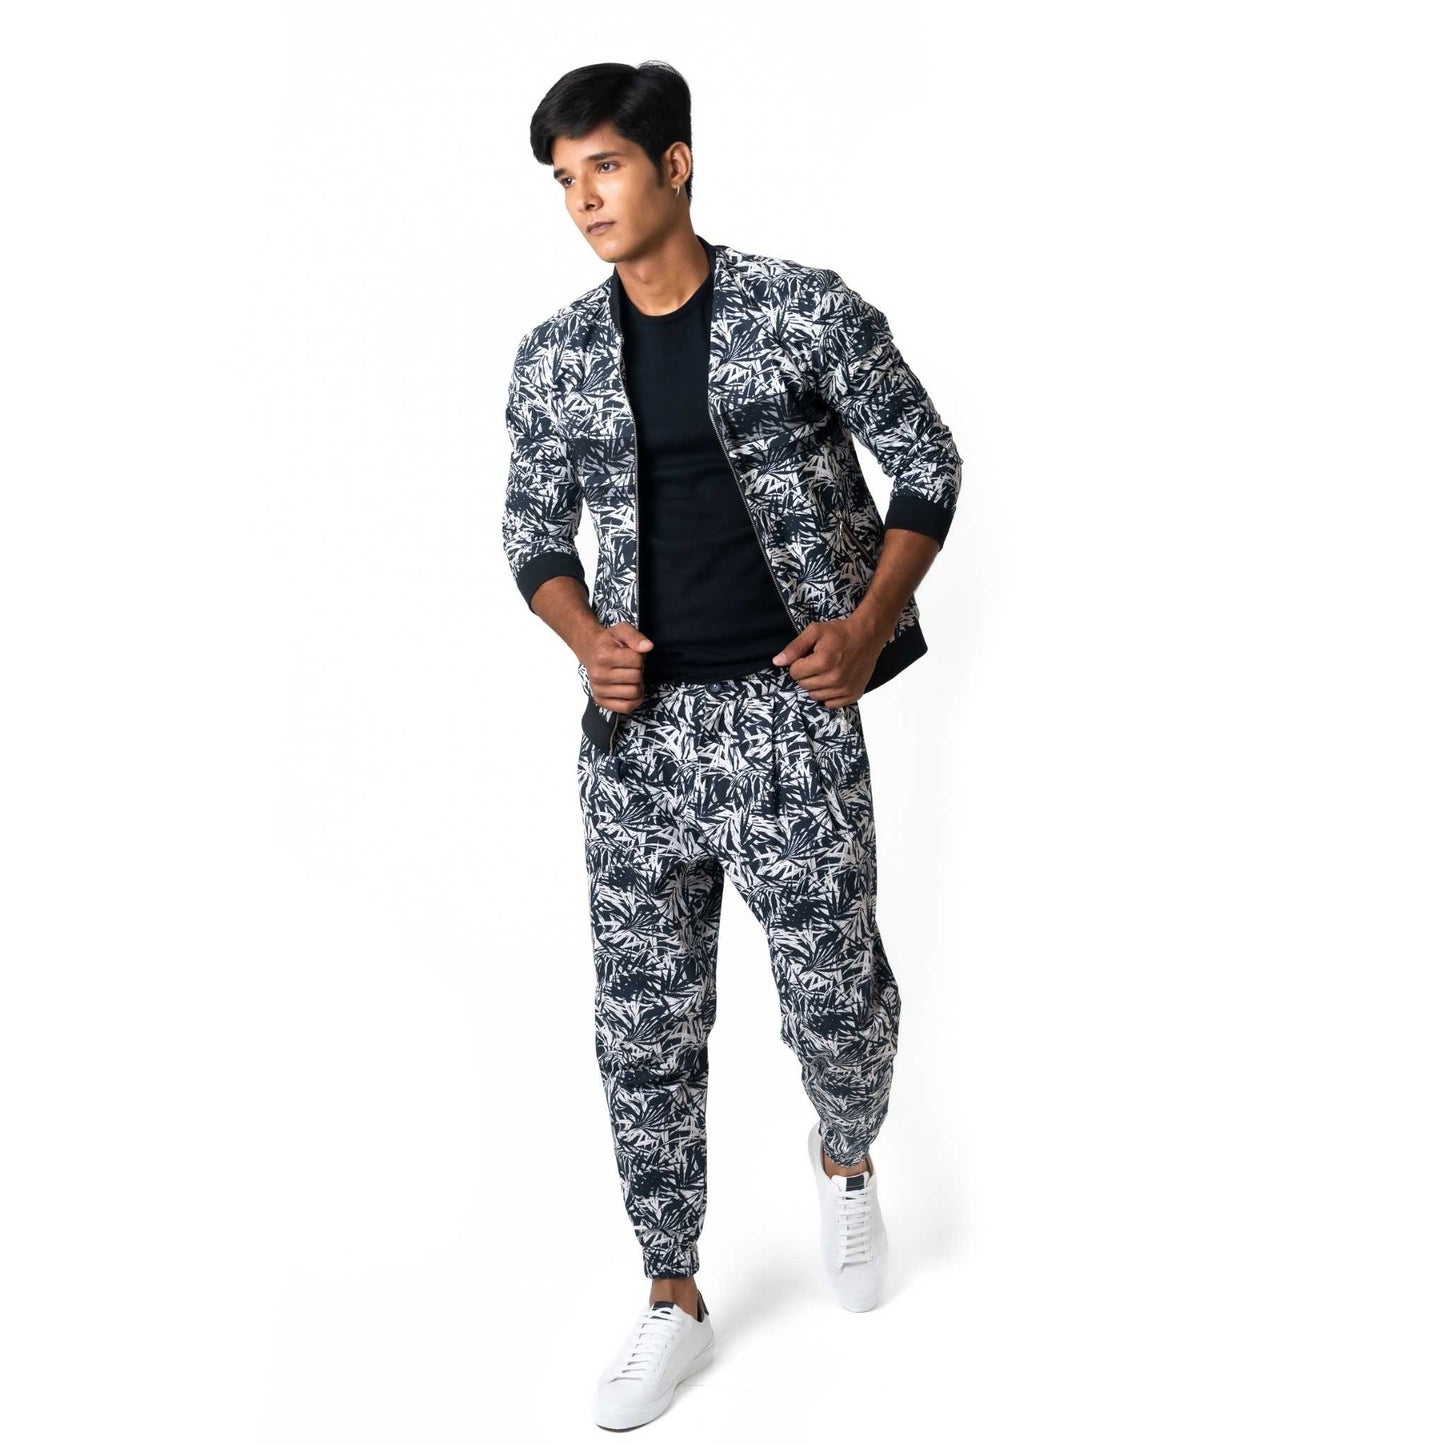 Bomber jacket and joggers co-ord set in black & white palm leaf printed cotton